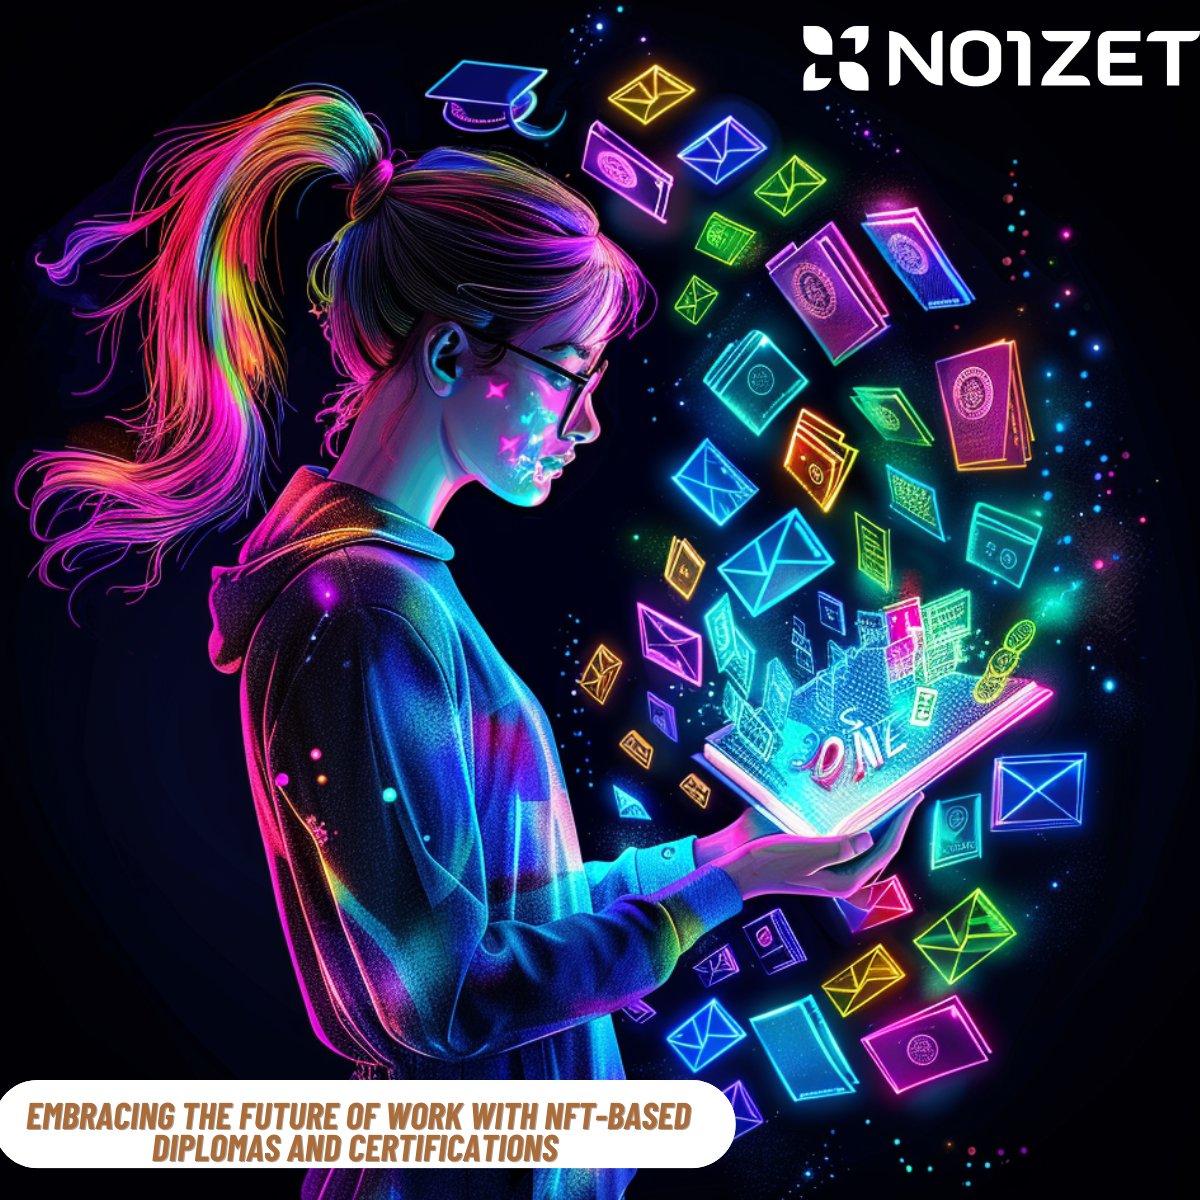 🚀 Embracing the #FutureOfWork with NFT-based diplomas! 🎓 
#N01zet is leading the charge in transforming how professional credentials are managed and verified. Secure, global, and eco-friendly! 🌍 #DigitalCredentials #NFTRevolution

🔗 Secure, own, and share your achievements